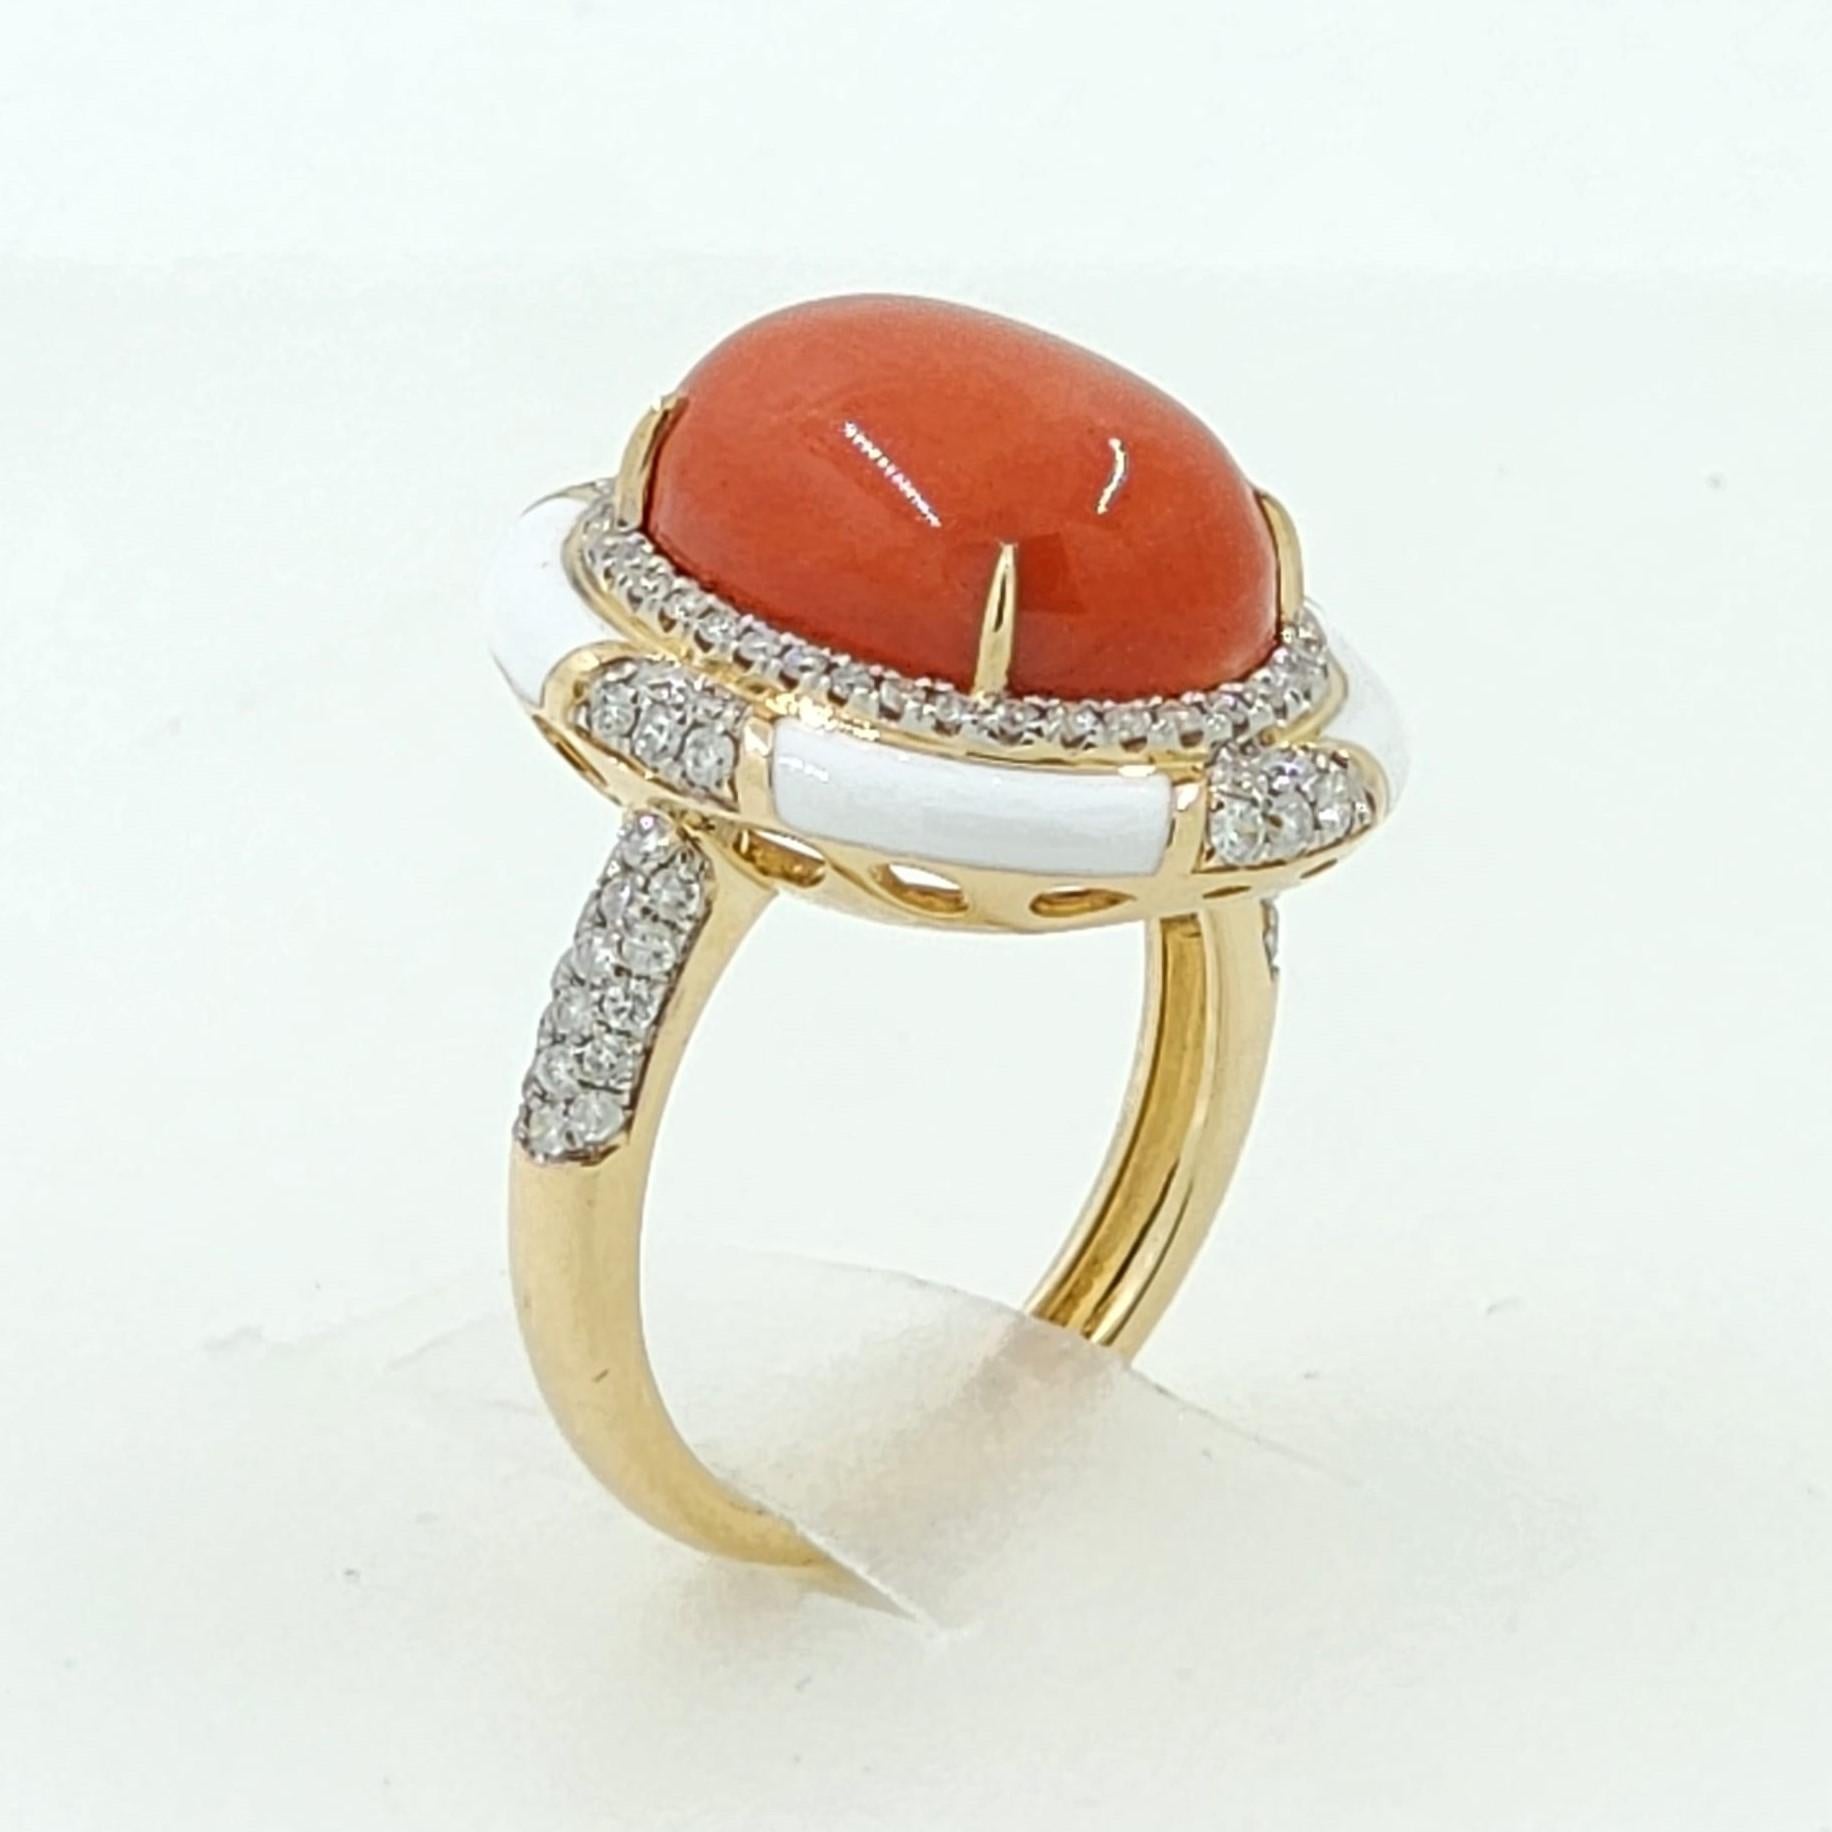 Contemporary 6.9ct Salmon Coral Diamond Enamel Ring in 18 Karat Yellow Gold For Sale